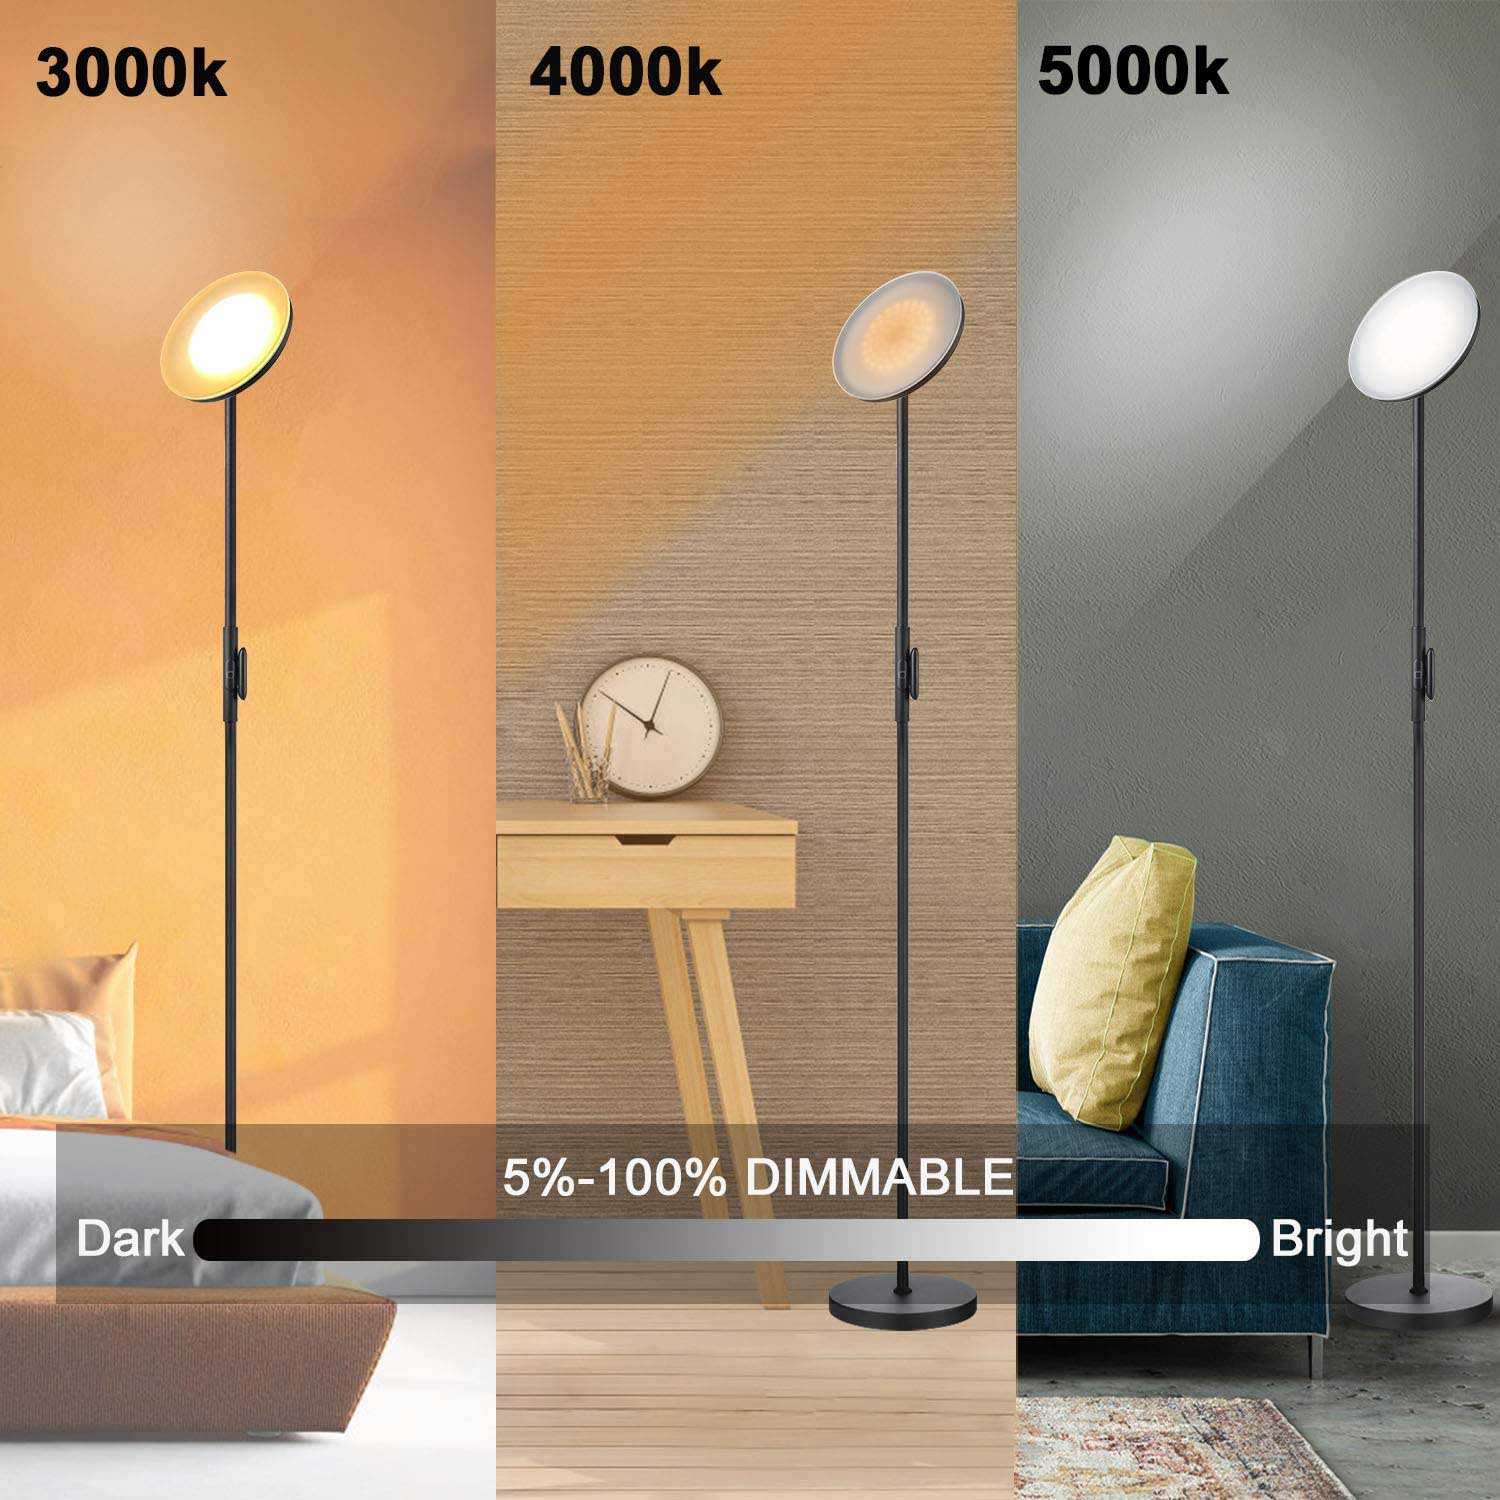 Sky LED Modern Torchiere 3 Color Floor Lamps | Yedwo Design